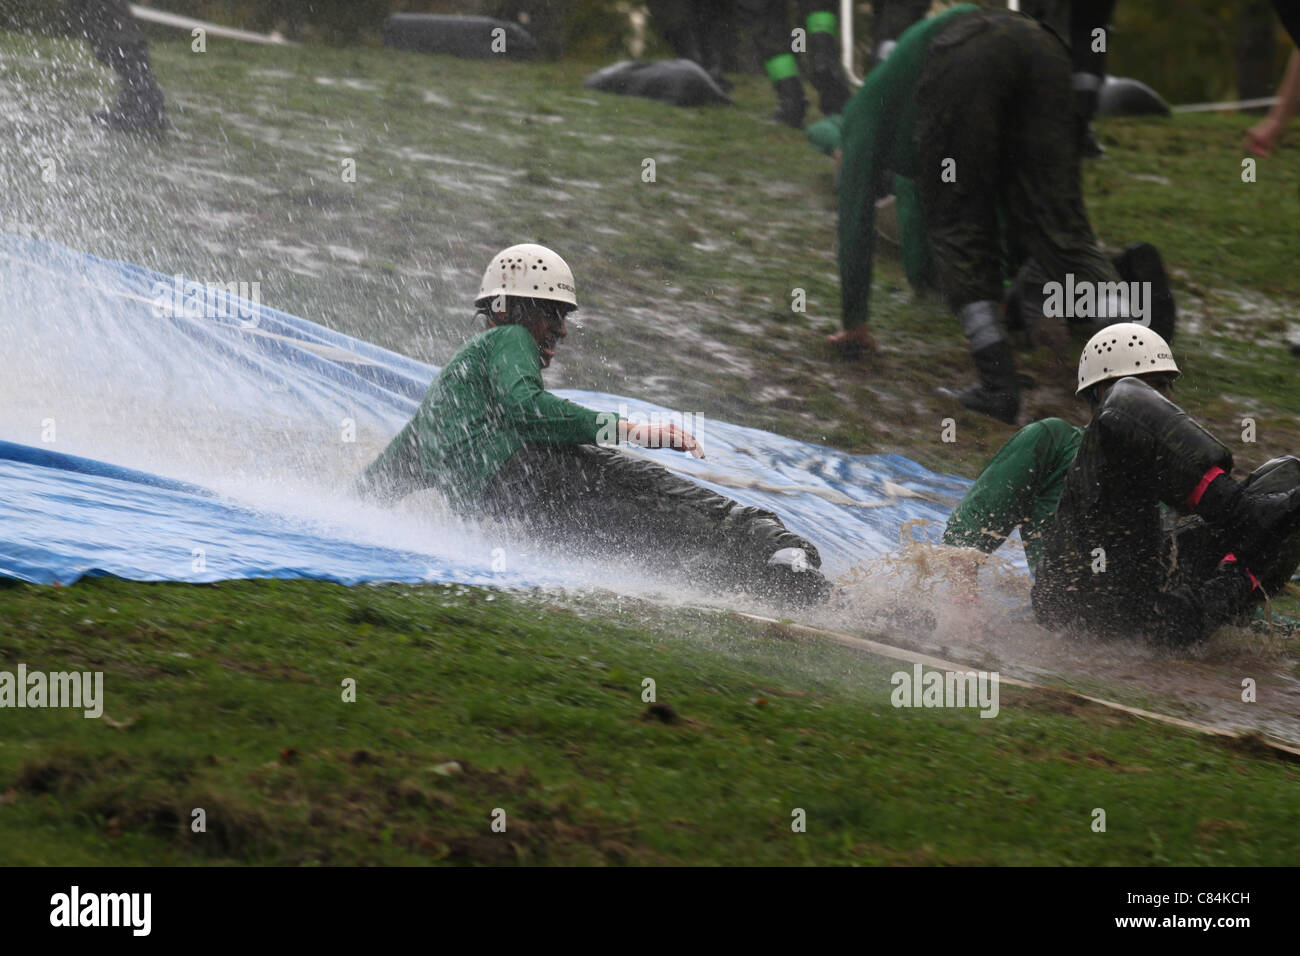 RMC first year recruits sliding down a muddy slope Stock Photo